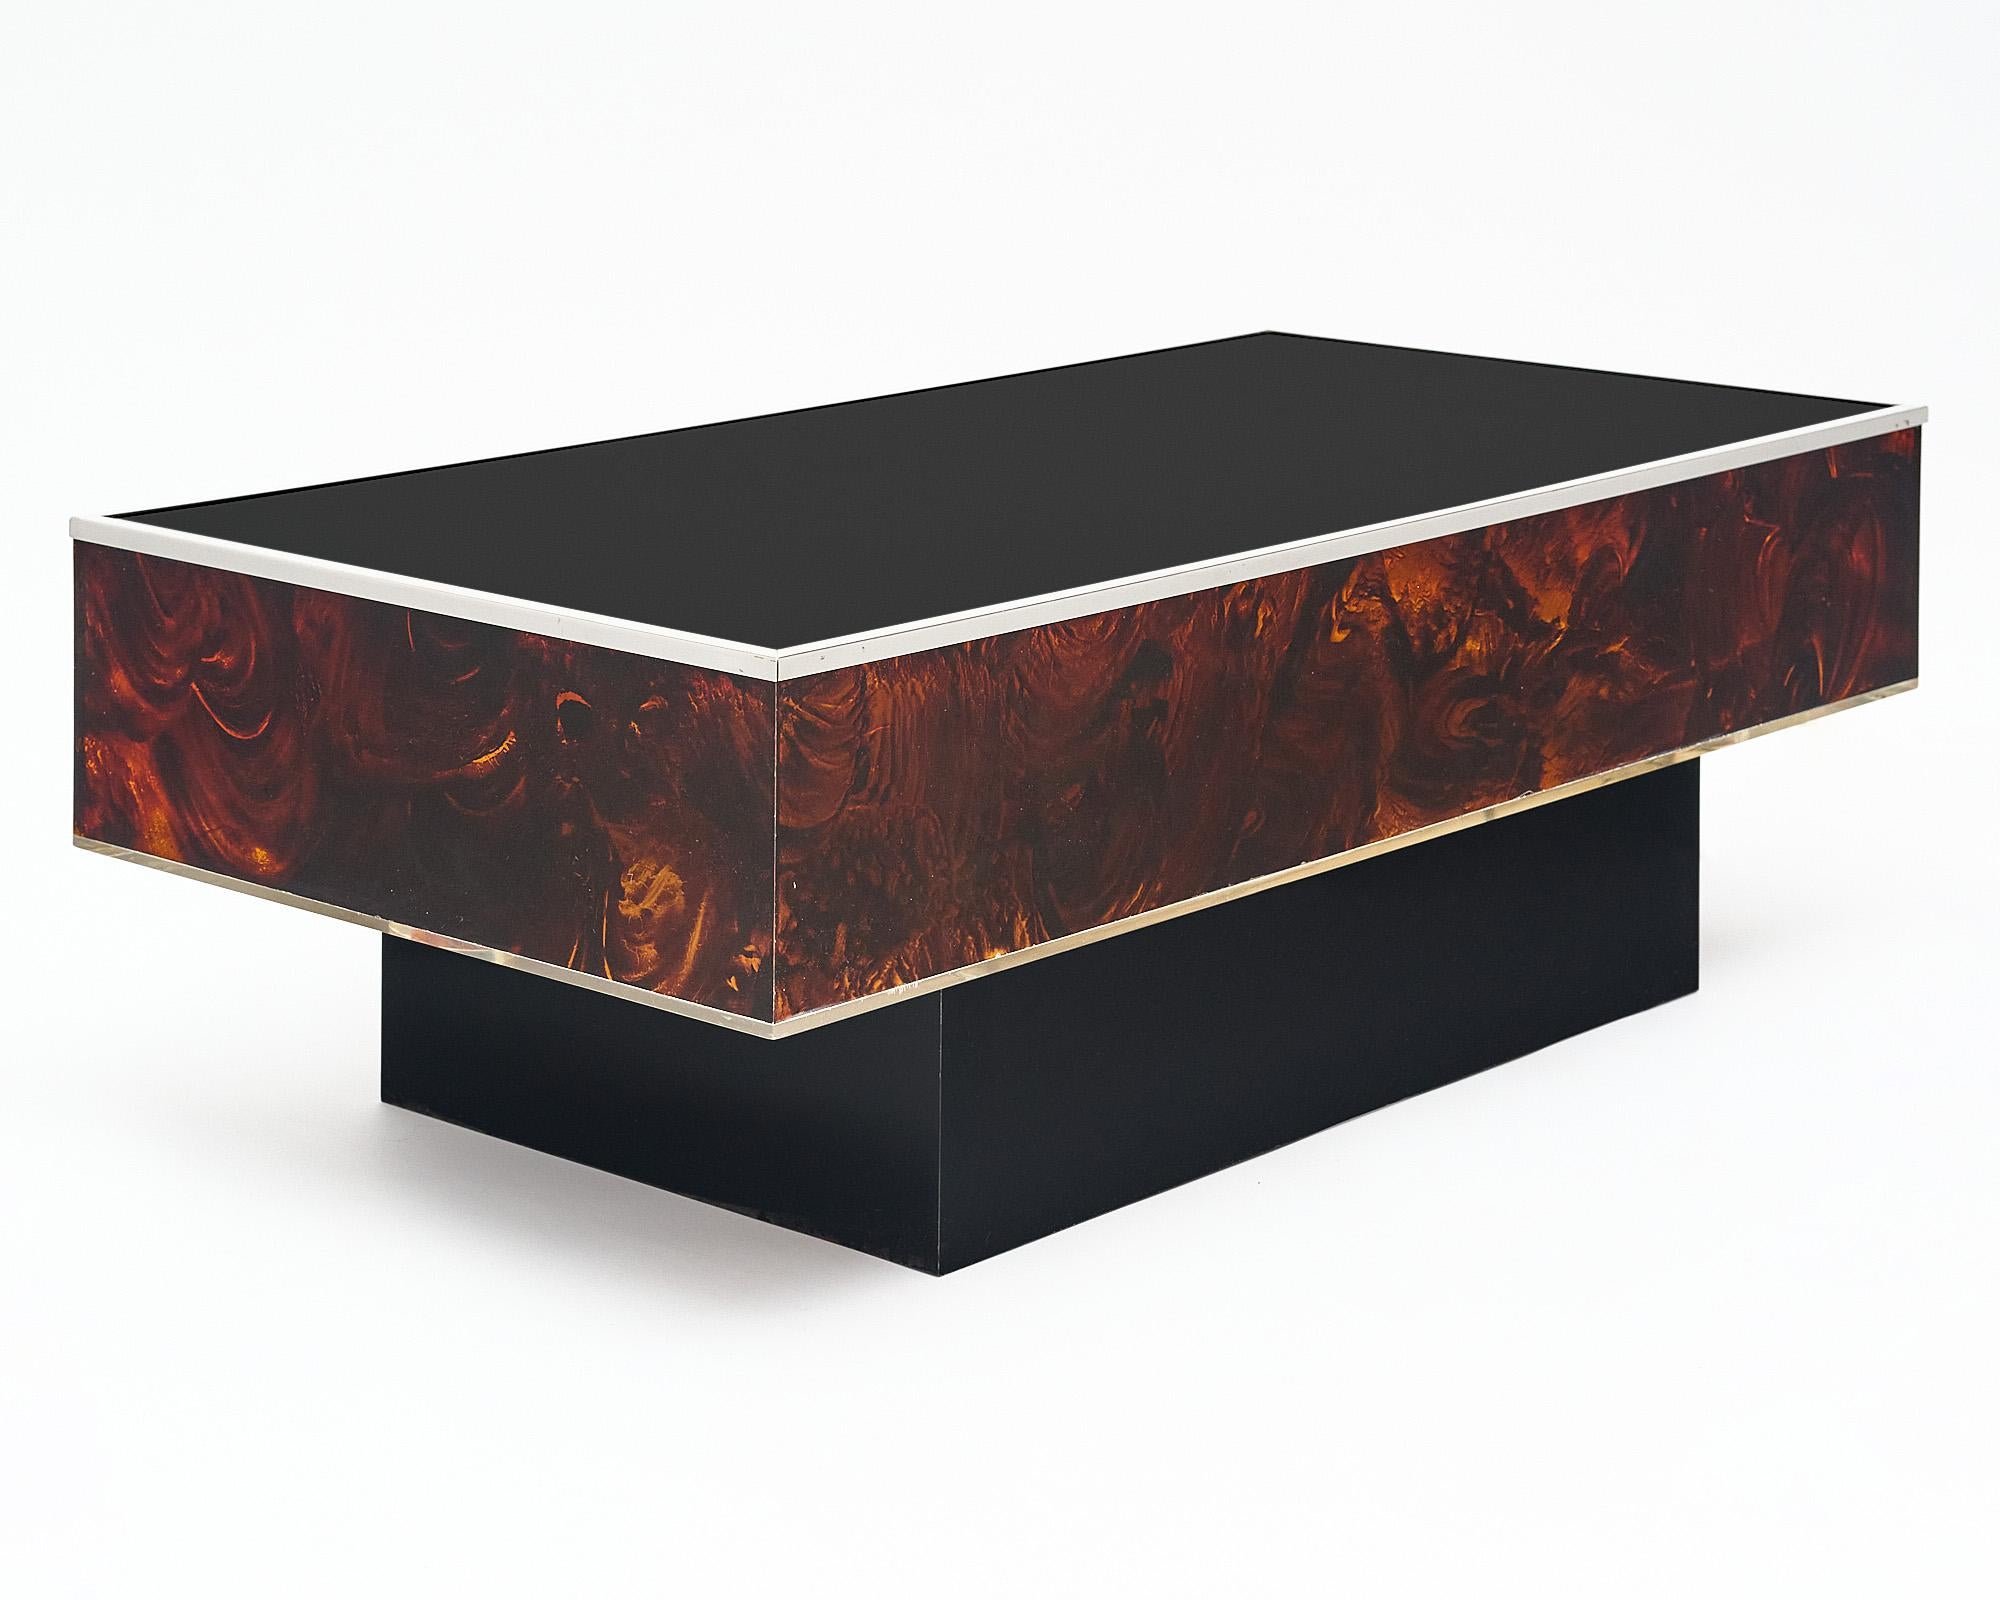 Coffee table from Italy made with Lucite and glass. This piece has sides of Lucite that are patterned to resemble burled wood. The top is black glass and is trimmed with chrome. The rectangular table sits on a black base. It lights up from within